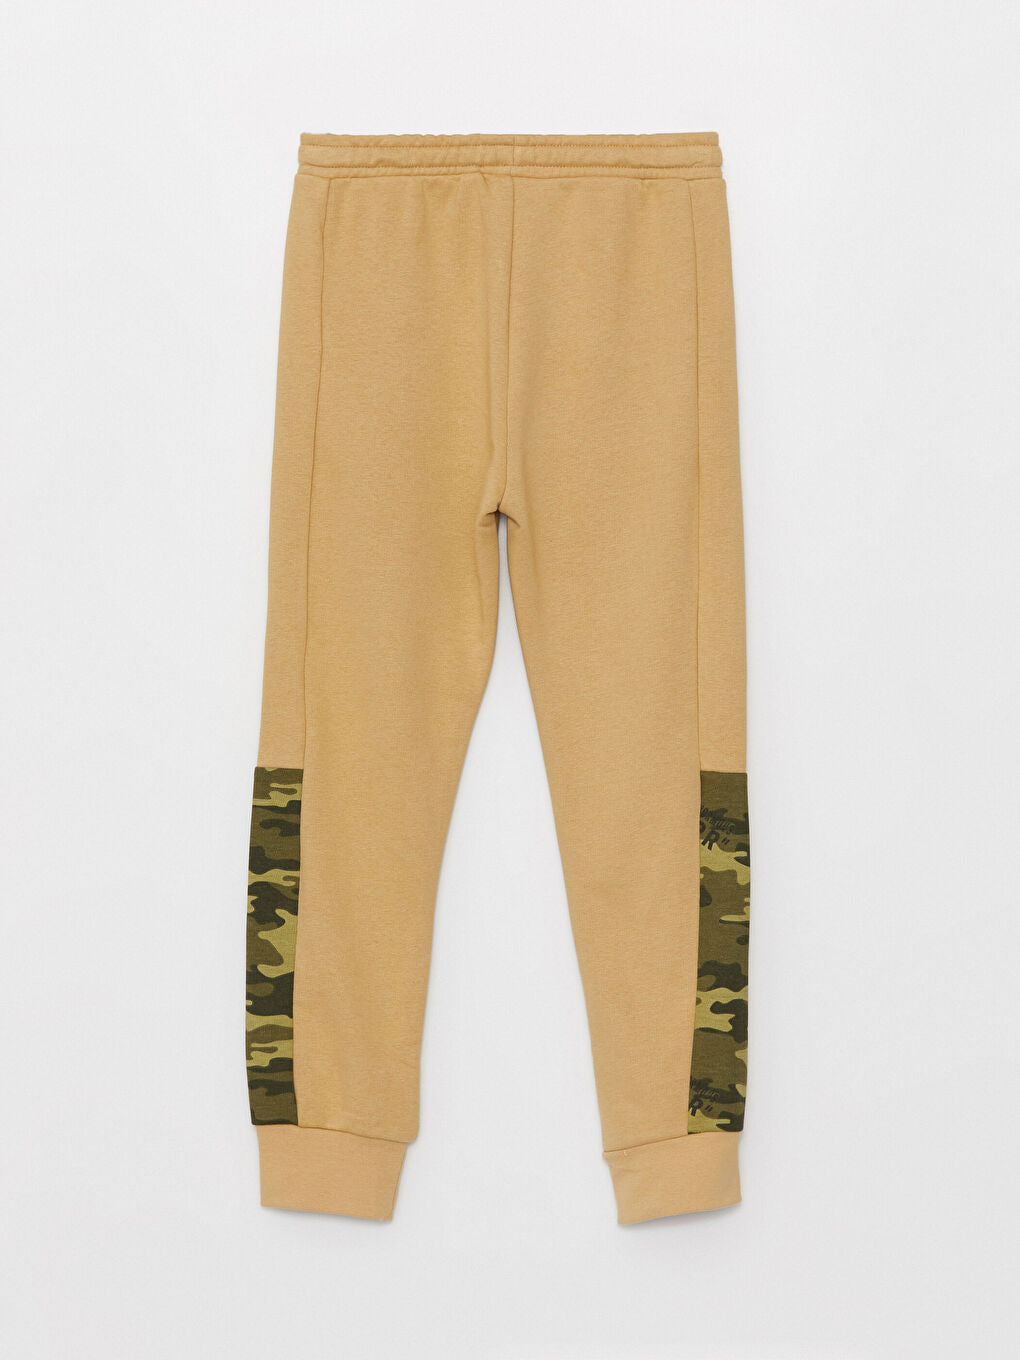 Camouflage Patterned Boys Jogger Sweatpants With Elastic Waistband